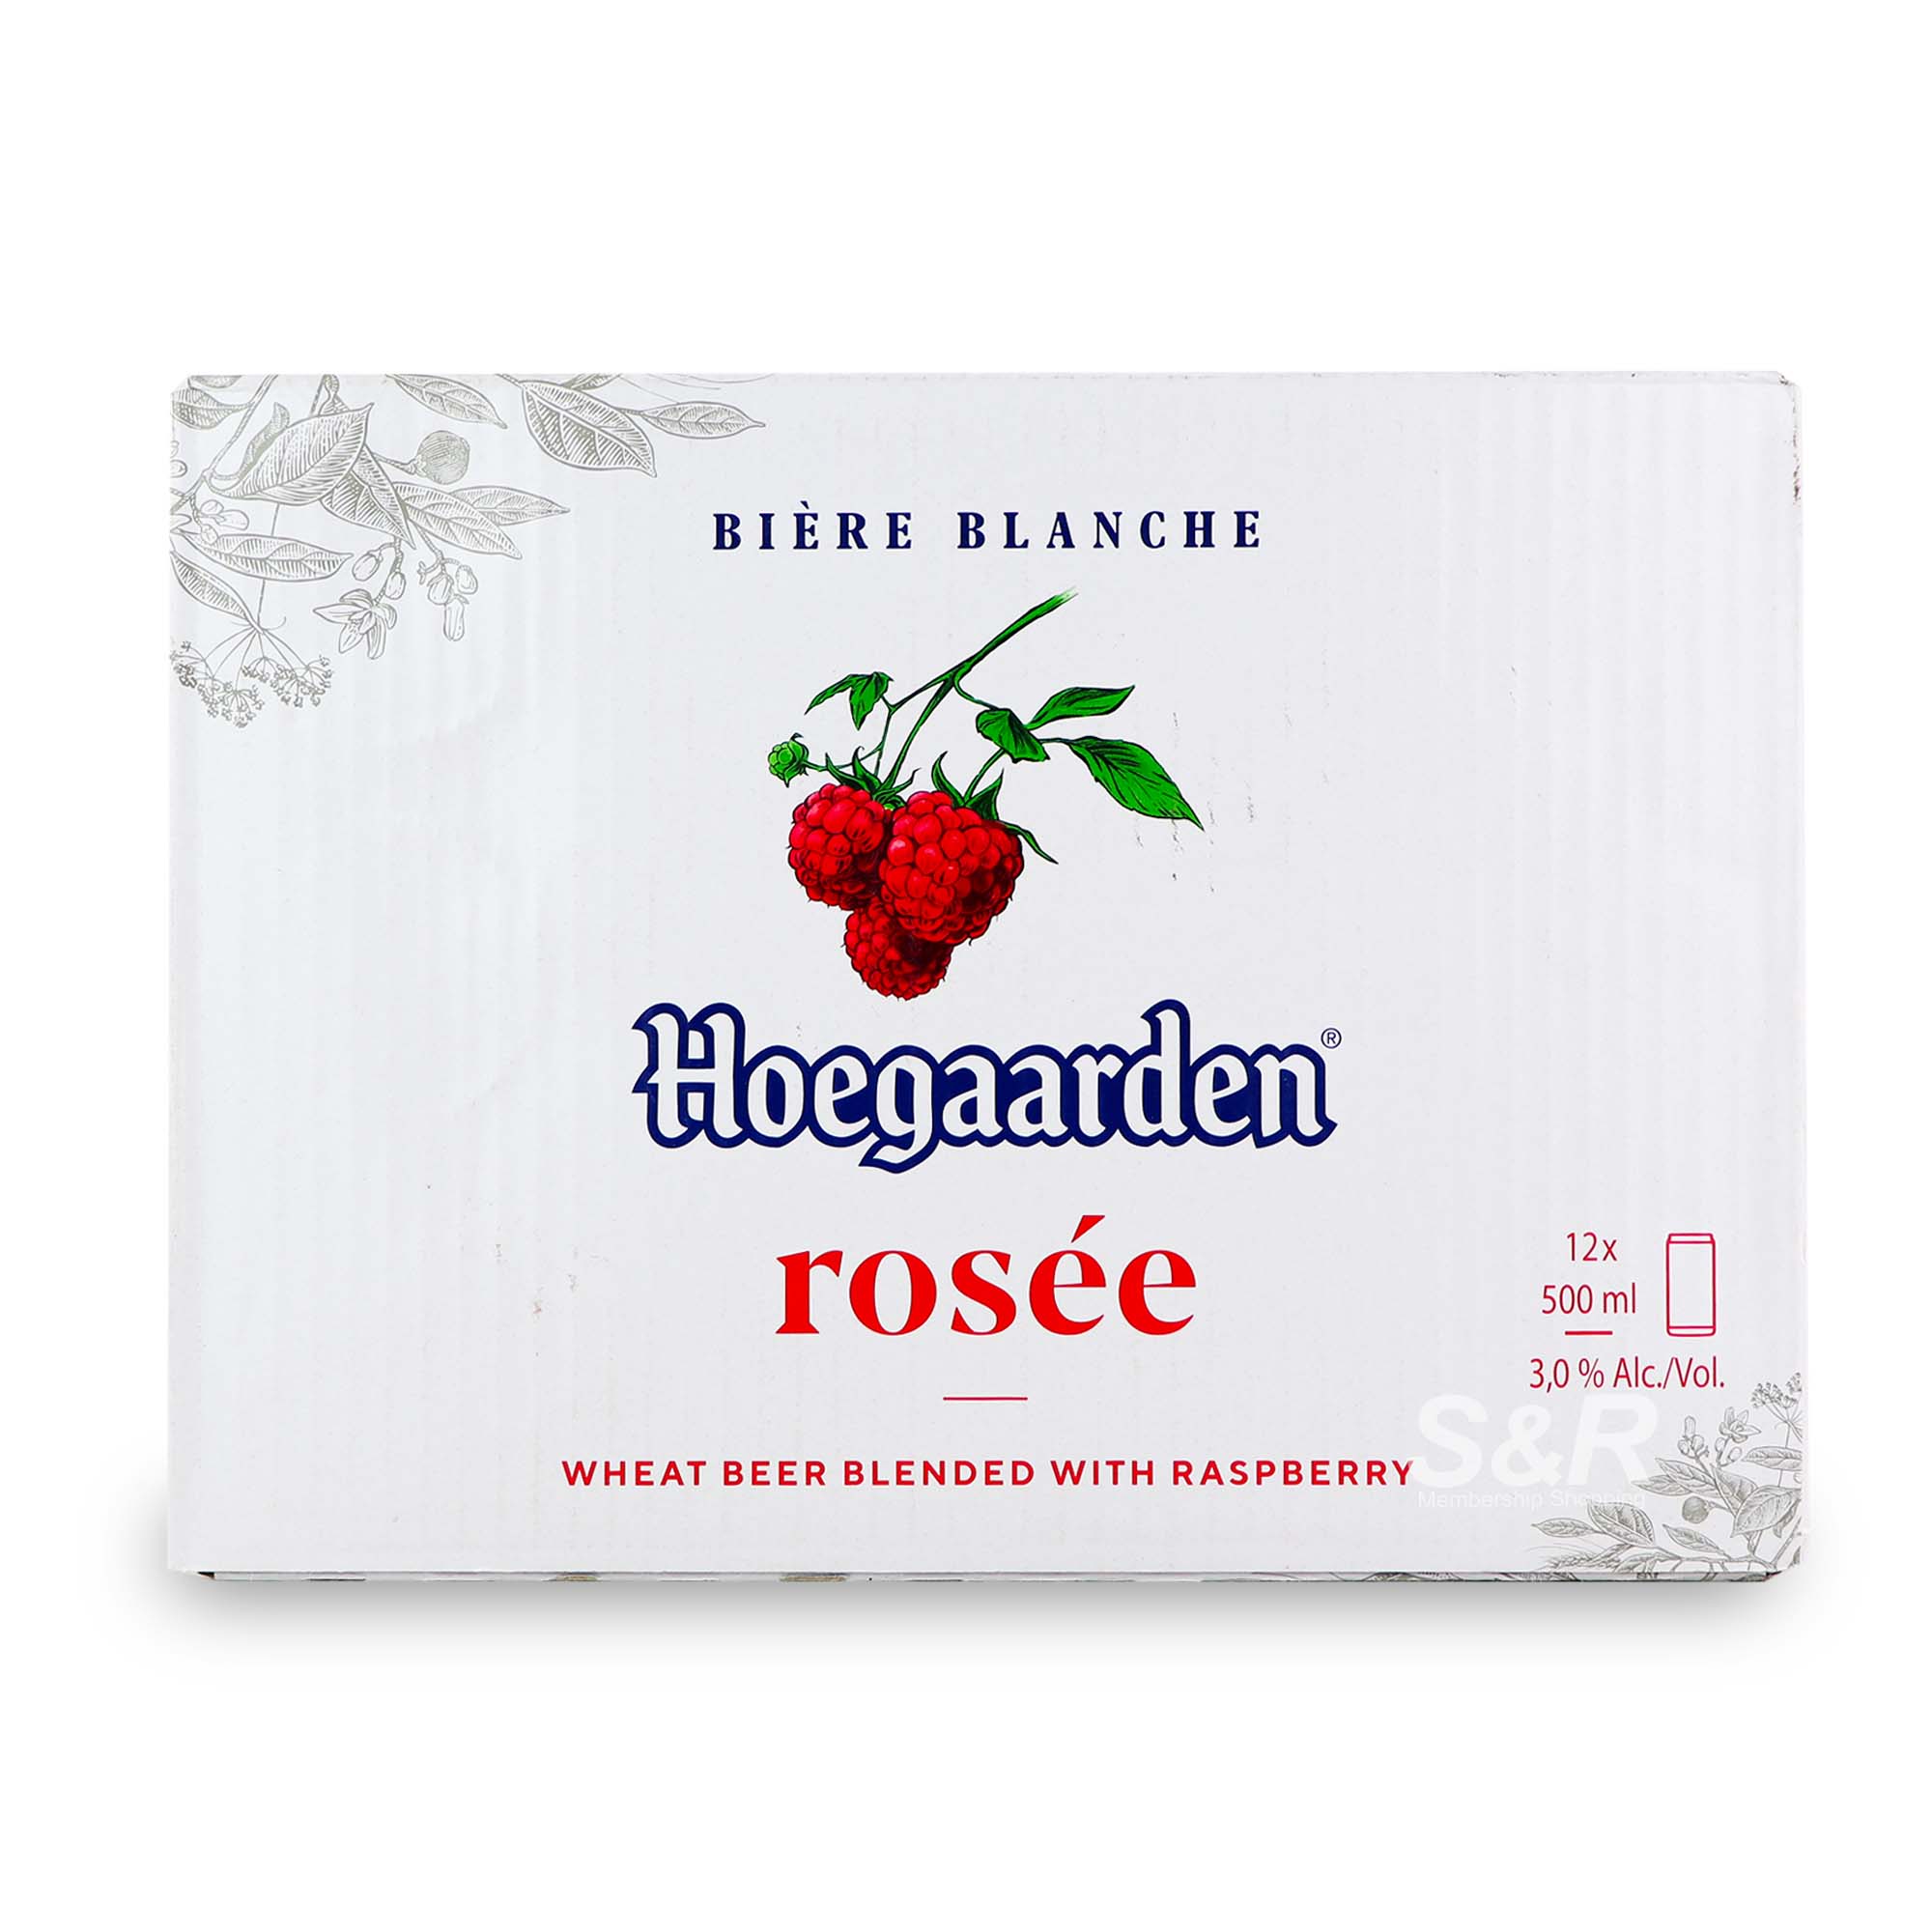 Hoegaarden Rosee Wheat Beer Blended with Raspberry 12 cans